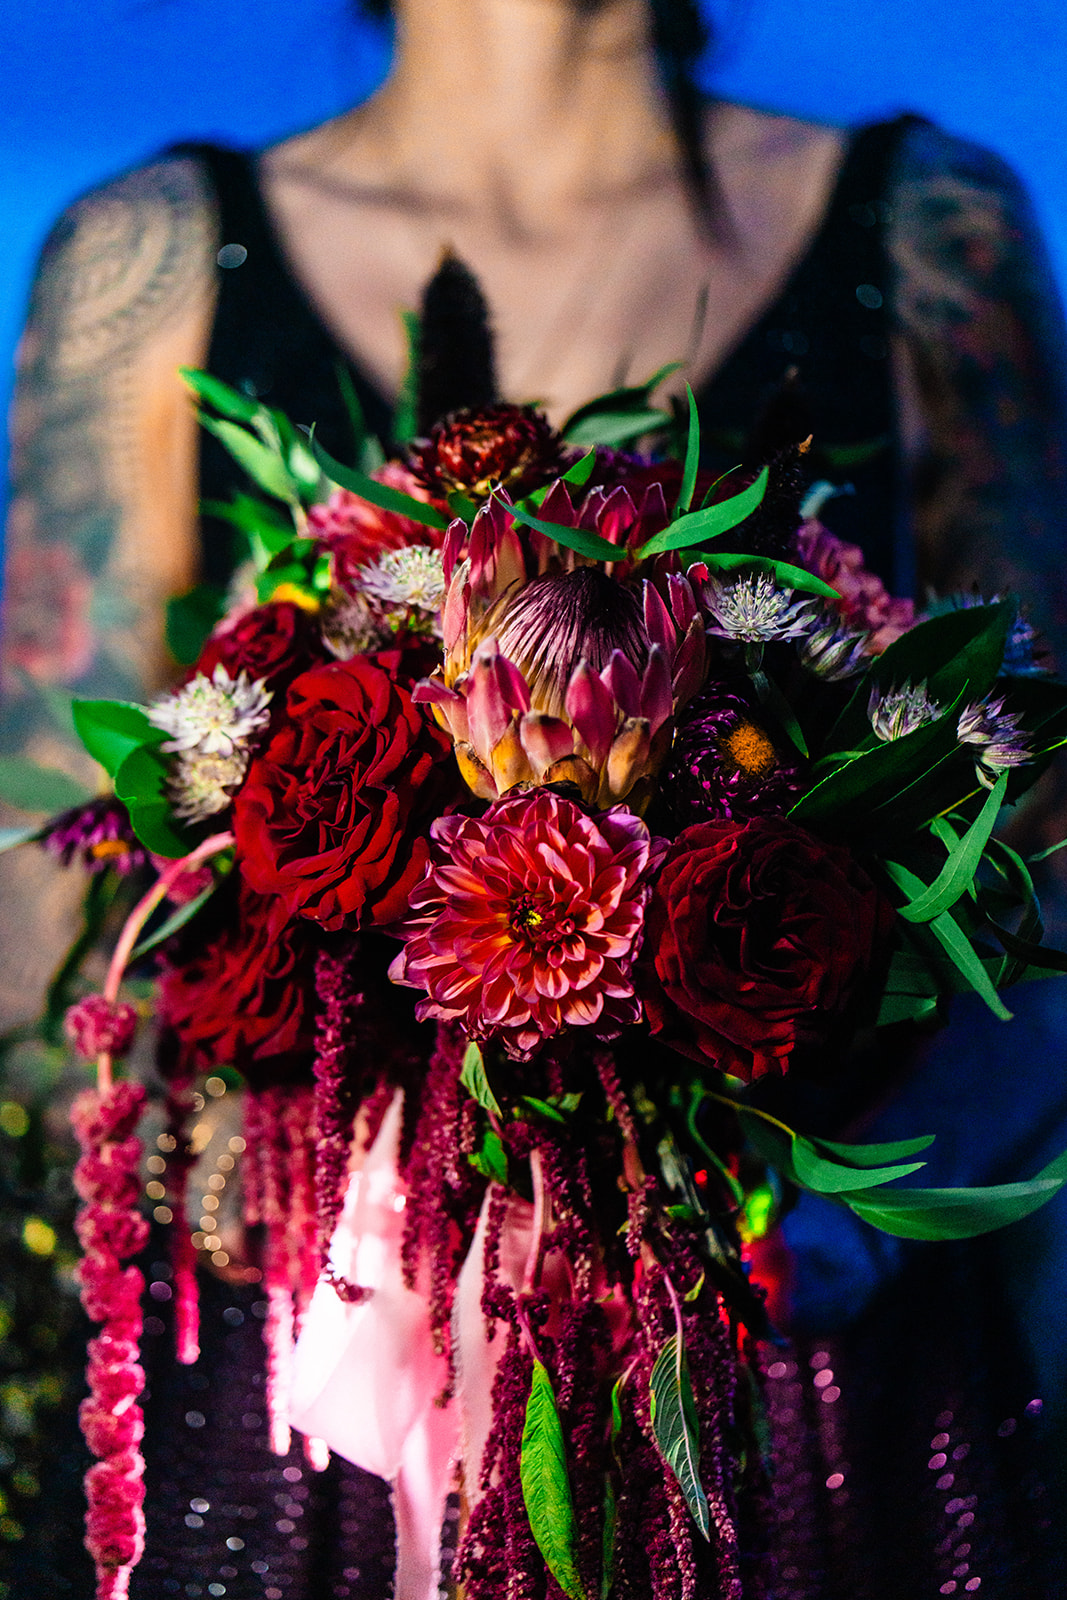 Beautiful bride holding a colorful bouquet full or red and pink florals